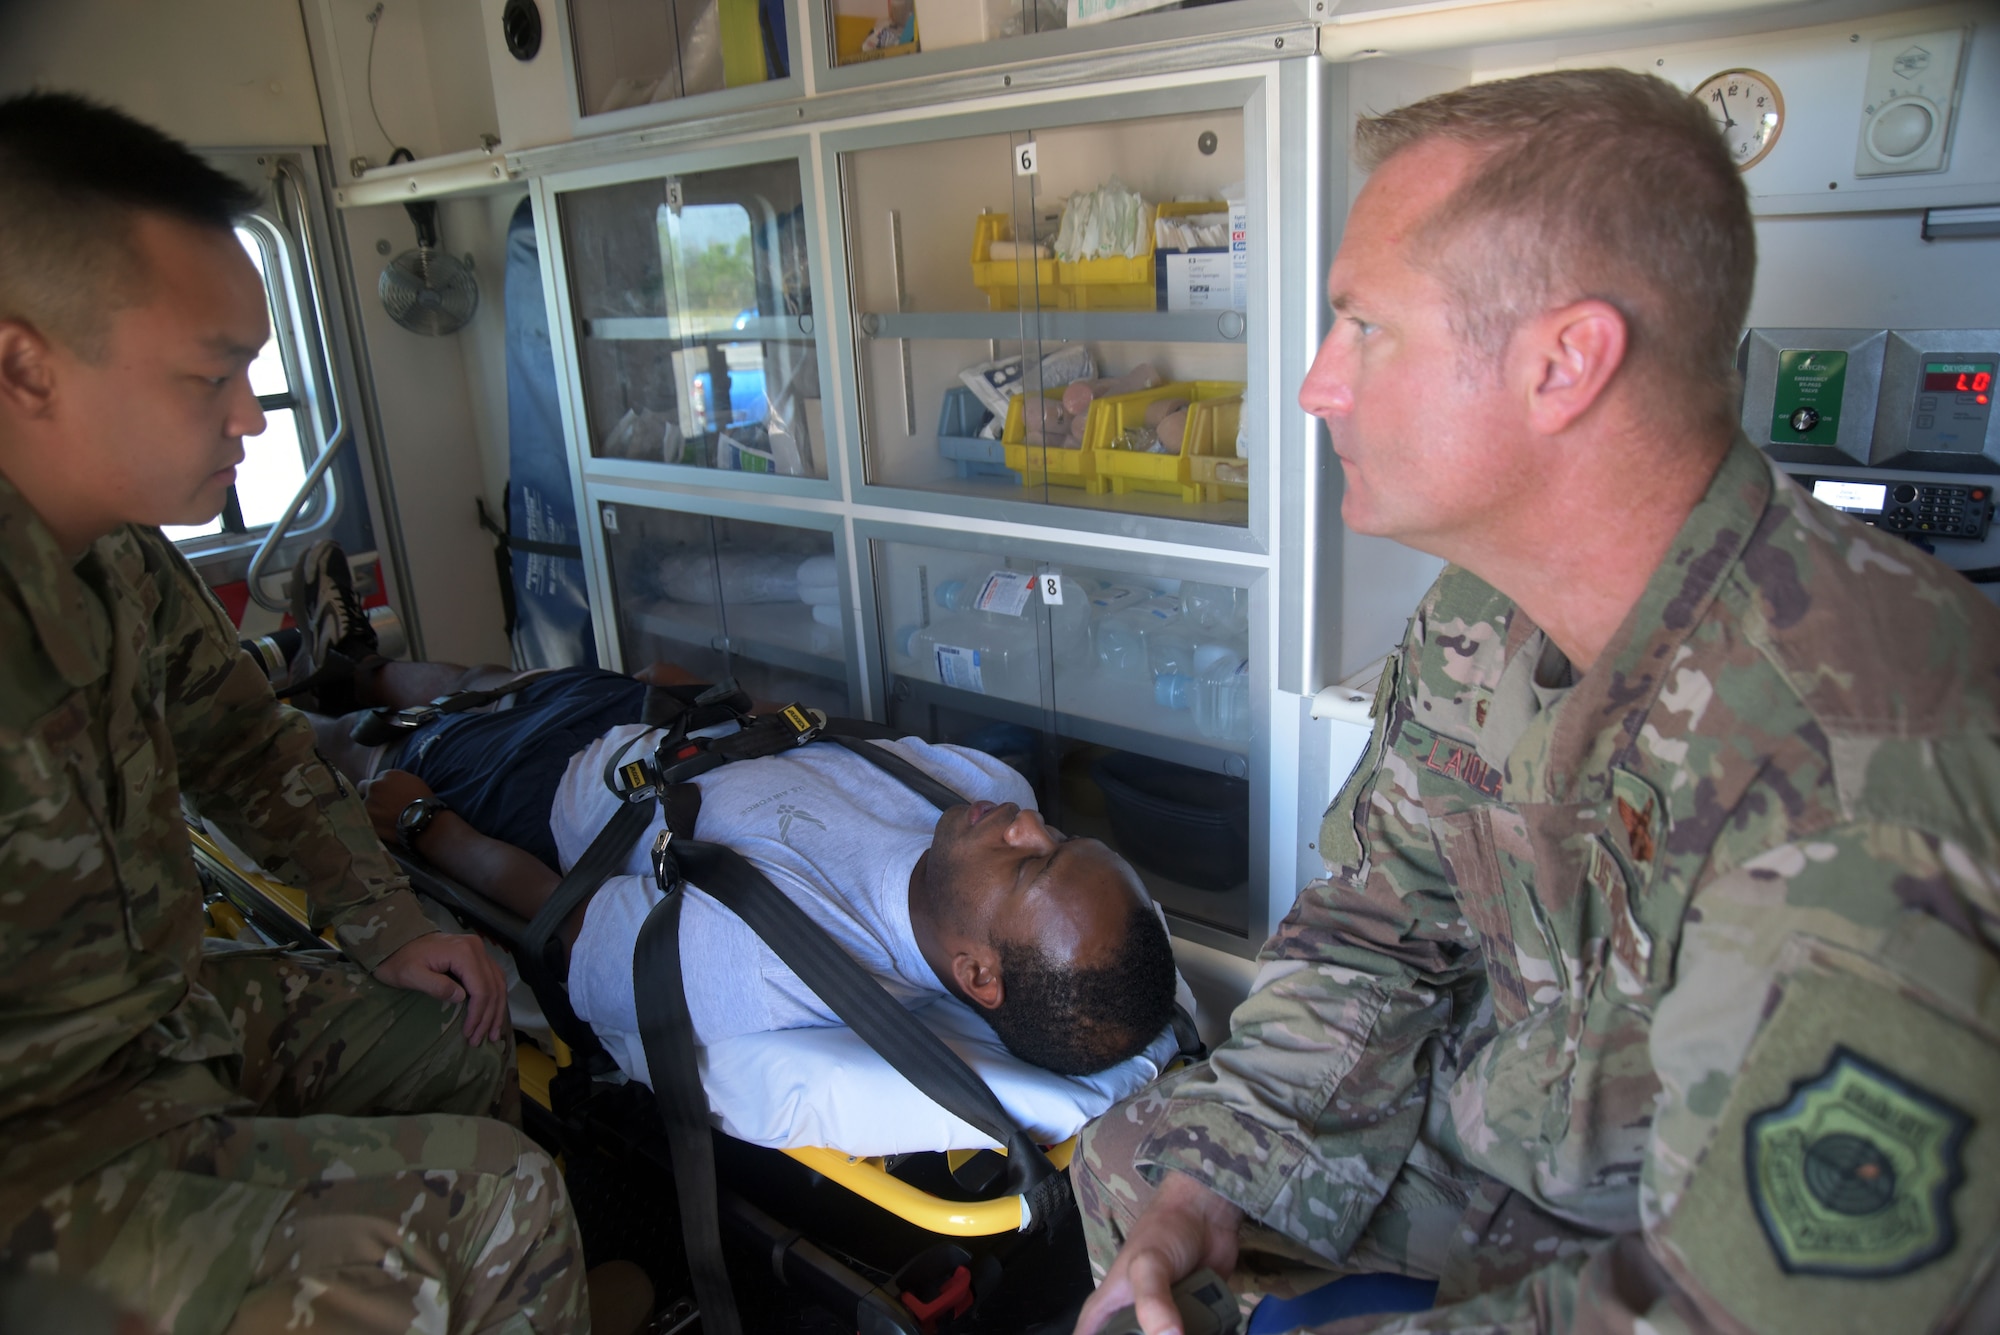 Airman 1st Class Brian Nguyen, 325th Operational Medical Readiness Squadron Ambulance Services Department medic, left, and Col. Brian Laidlaw, 325th Fighter Wing commander, right, care for a patient in a simulated medical response scenario Oct. 4, 2019, at Tyndall Air Force Base, Florida. Nguyen was hand selected to represent the 325th Medical Group for the commander’s Airman Shadow Program, which aims to give the commander a first-hand view of what Airmen do on the job. (U.S. Air Force photo by Staff Sgt. Magen M. Reeves)